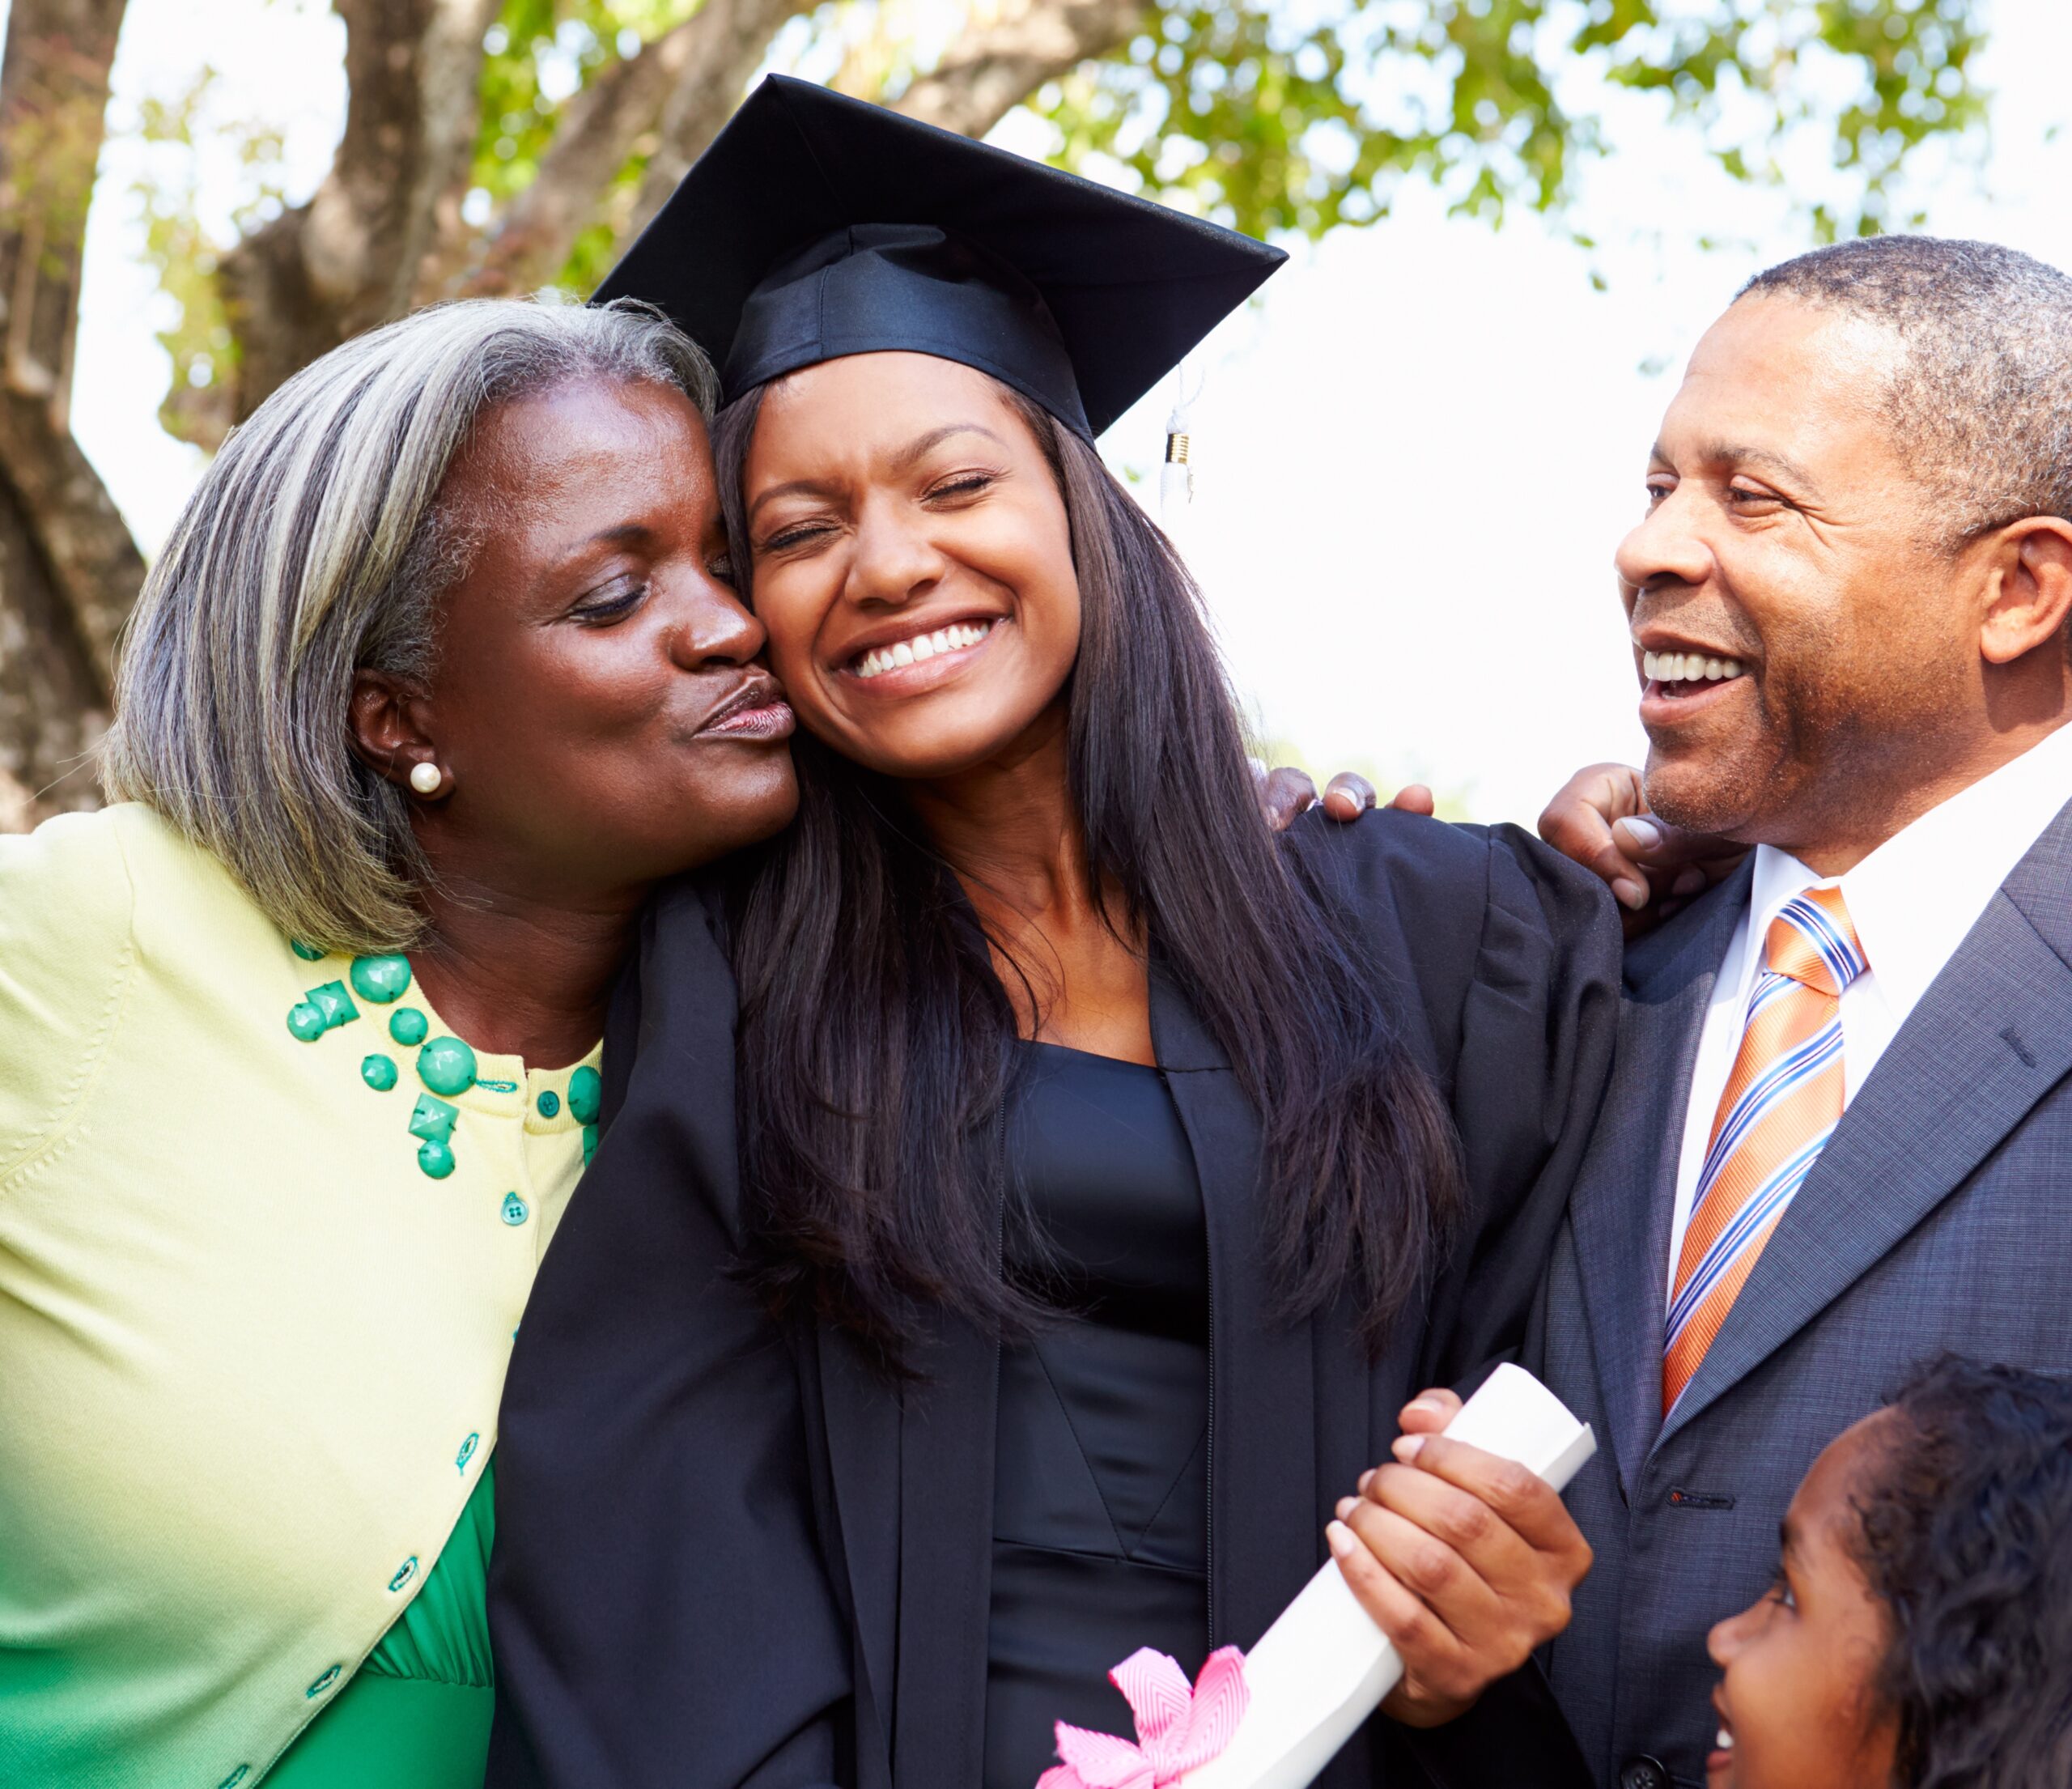 smiling graduating young women with her parents hugging her